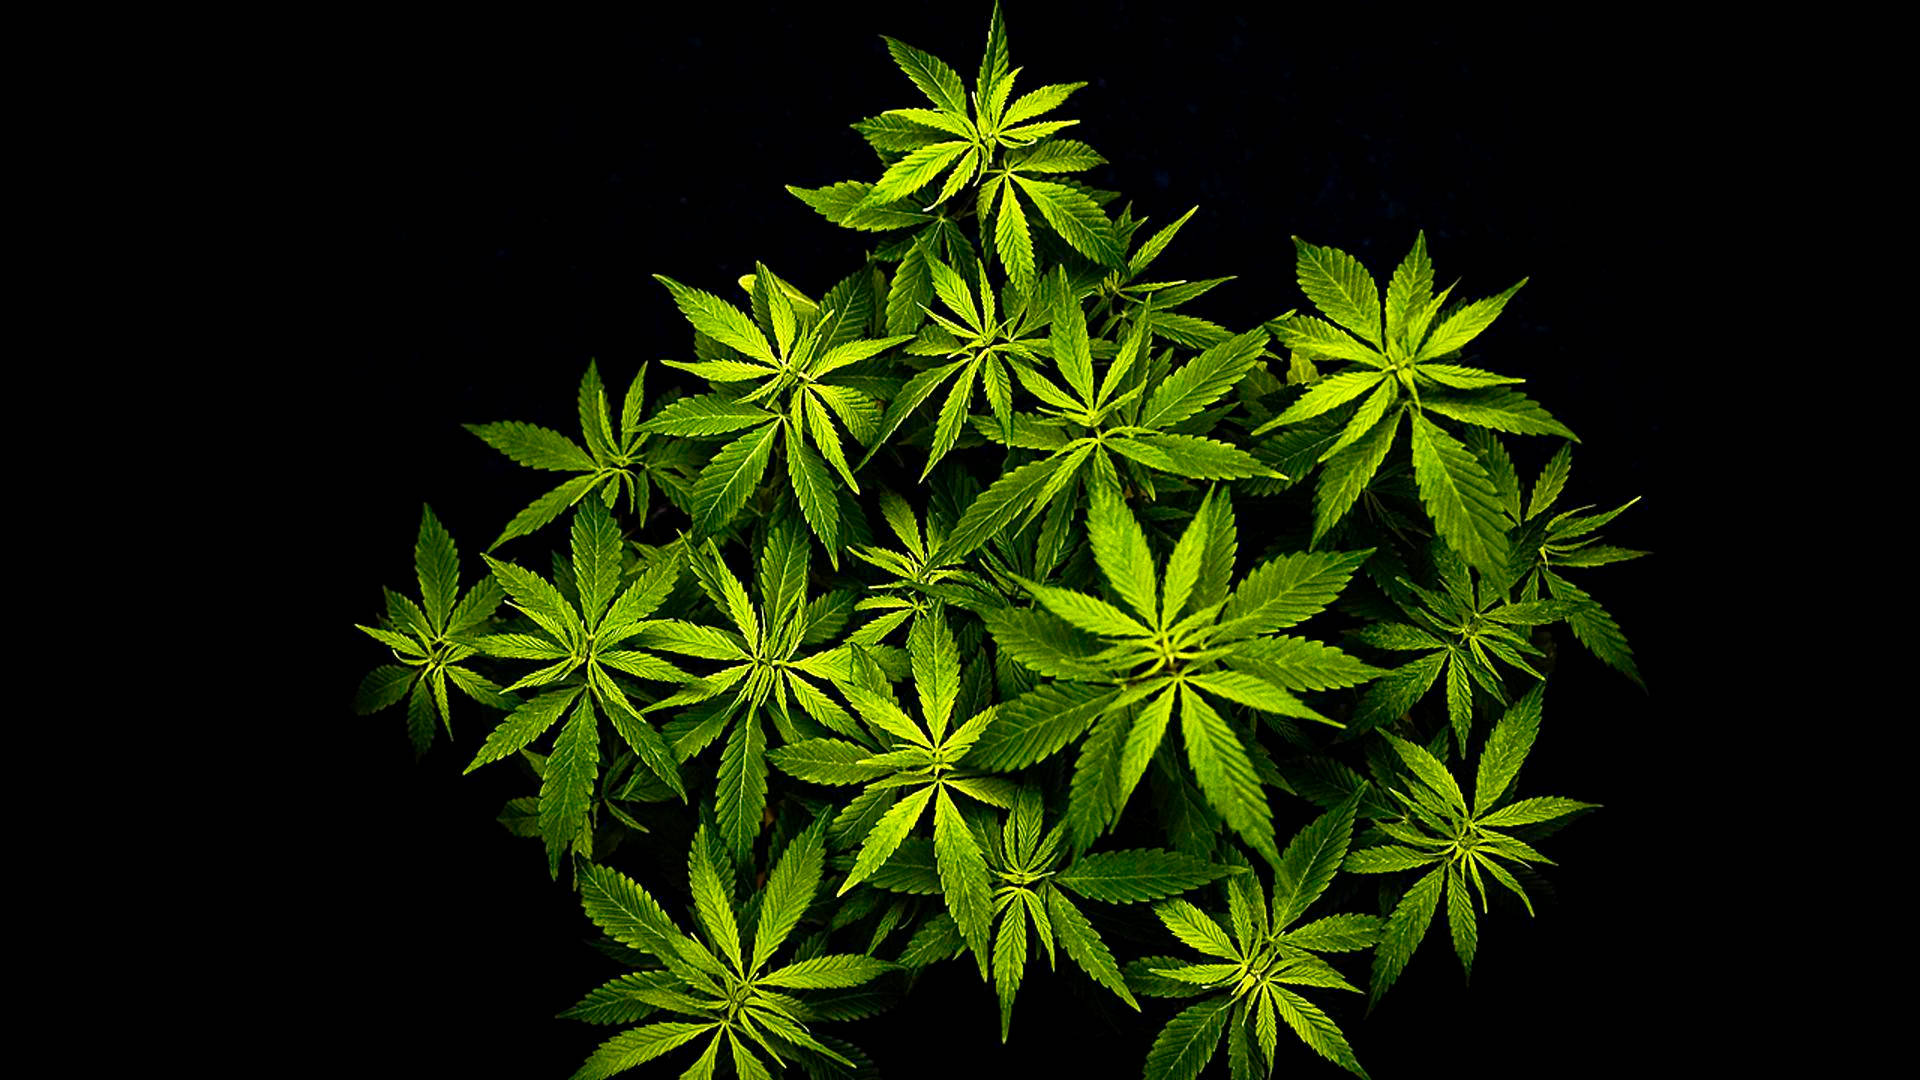 Top 999+ Cool Weed Wallpaper Full HD, 4K Free to Use